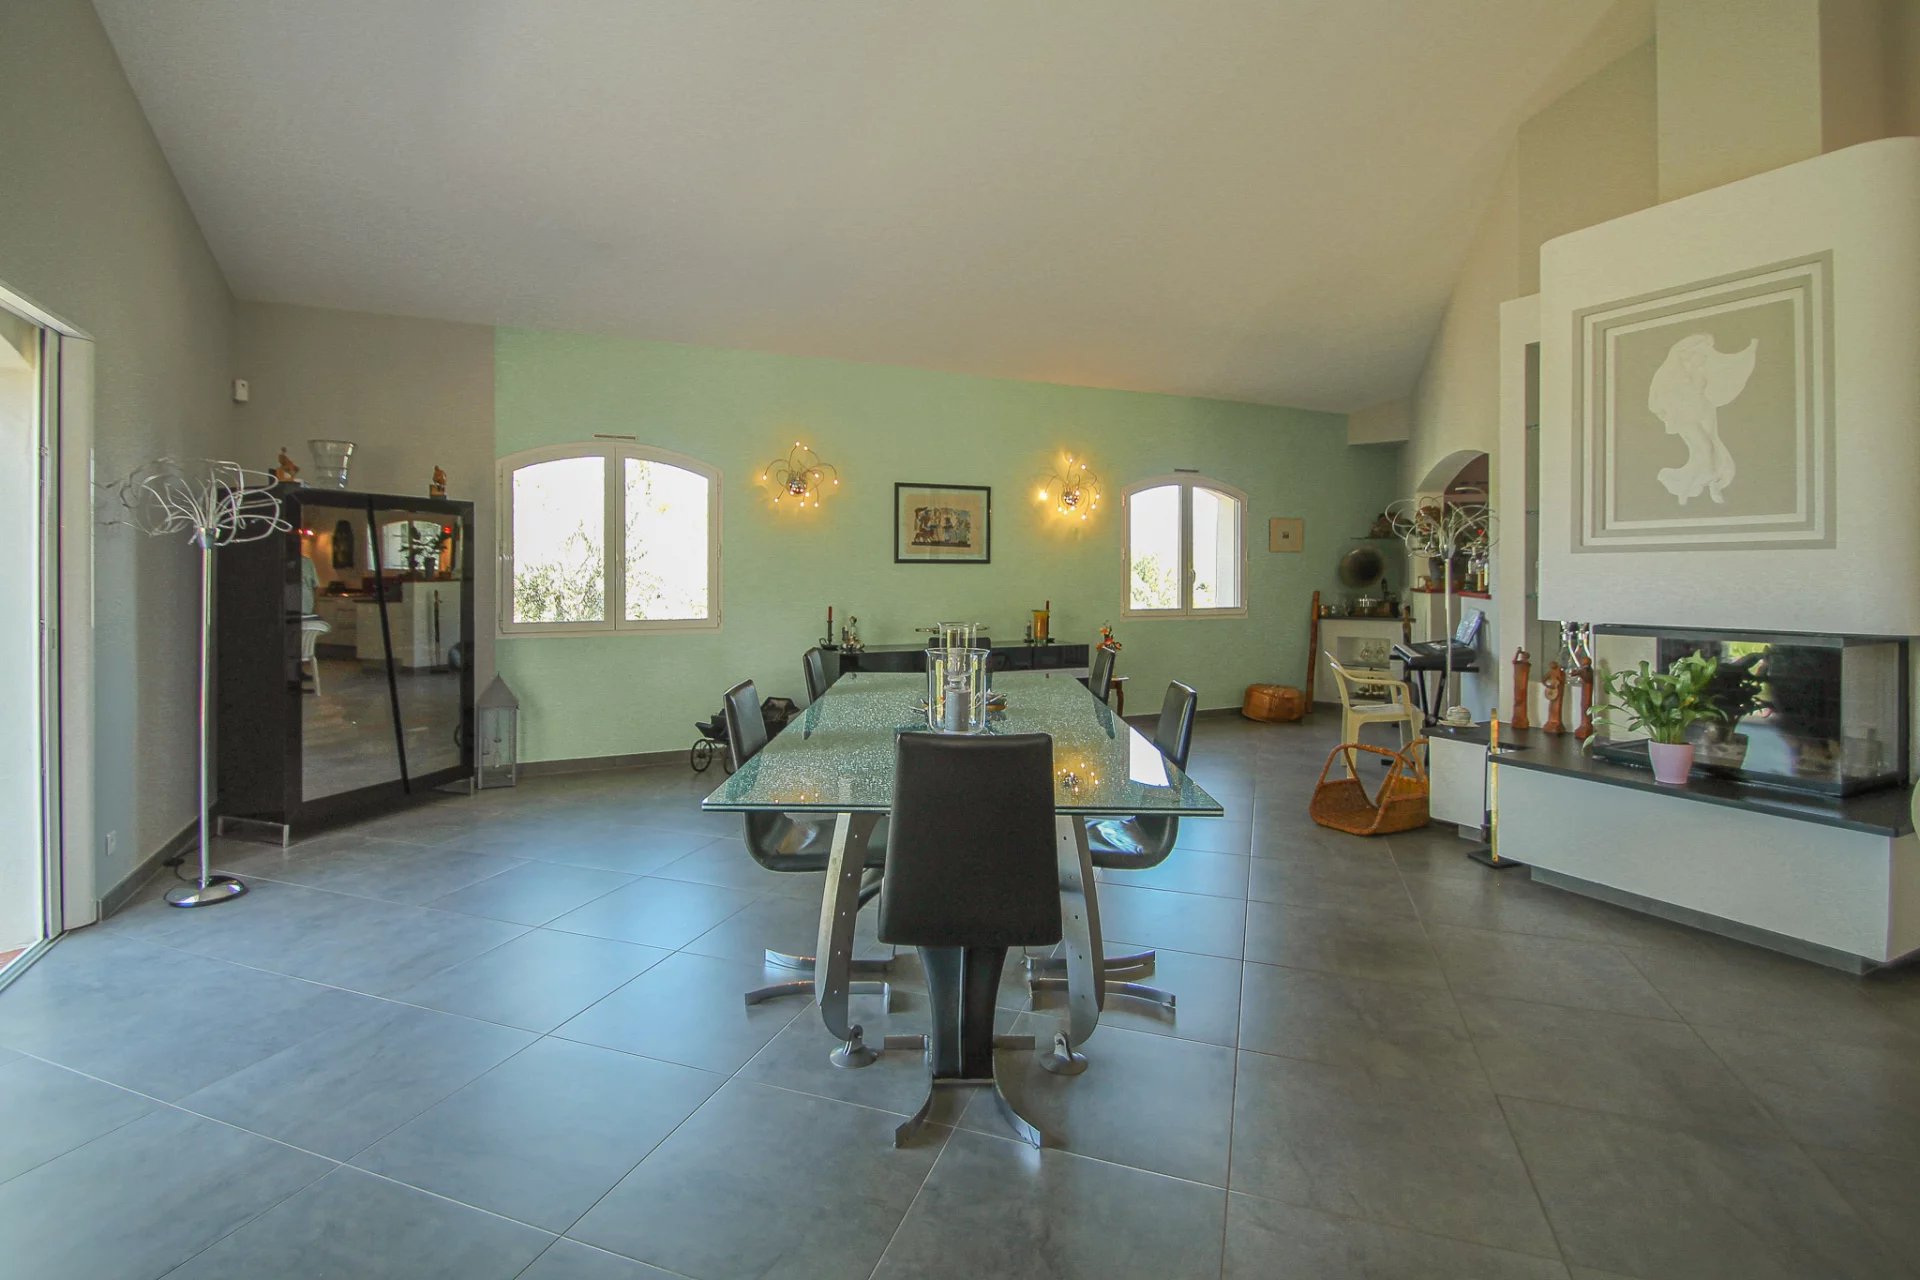 Spacious lovely and light villa in perfect condition with pool and large garage space